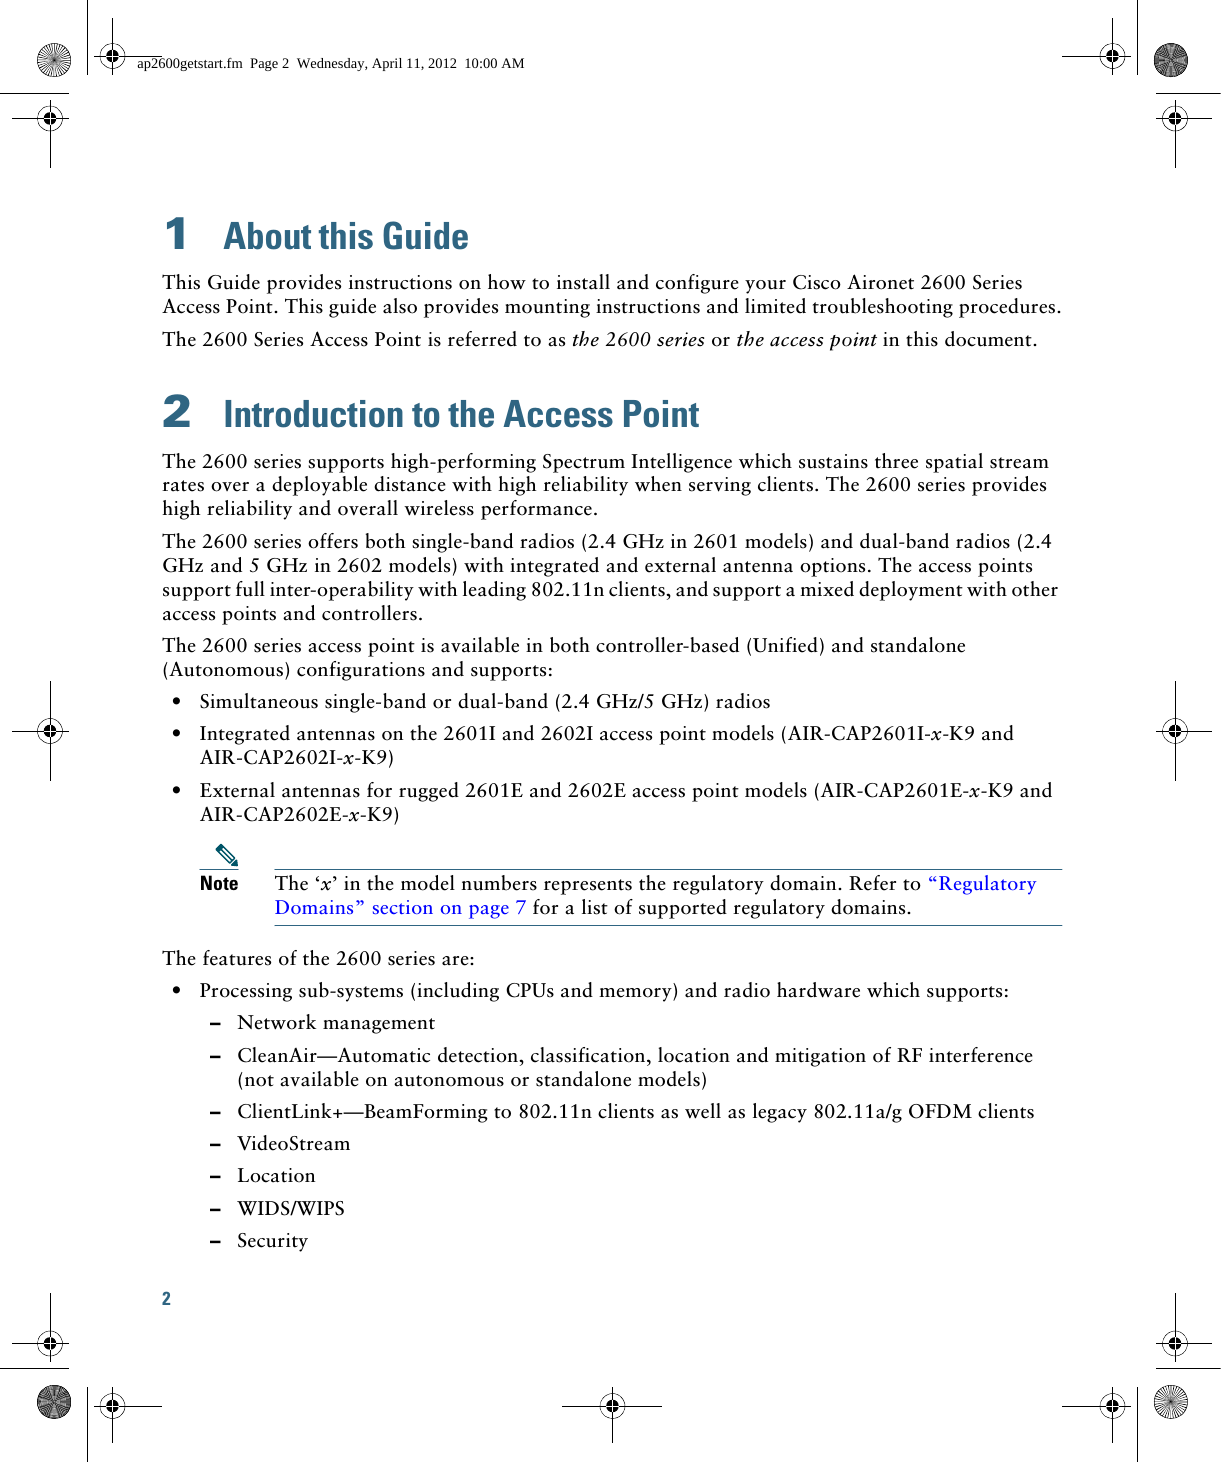 2 1  About this GuideThis Guide provides instructions on how to install and configure your Cisco Aironet 2600 Series Access Point. This guide also provides mounting instructions and limited troubleshooting procedures.The 2600 Series Access Point is referred to as the 2600 series or the access point in this document.2  Introduction to the Access PointThe 2600 series supports high-performing Spectrum Intelligence which sustains three spatial stream rates over a deployable distance with high reliability when serving clients. The 2600 series provides high reliability and overall wireless performance.The 2600 series offers both single-band radios (2.4 GHz in 2601 models) and dual-band radios (2.4 GHz and 5 GHz in 2602 models) with integrated and external antenna options. The access points support full inter-operability with leading 802.11n clients, and support a mixed deployment with other access points and controllers.The 2600 series access point is available in both controller-based (Unified) and standalone (Autonomous) configurations and supports:  • Simultaneous single-band or dual-band (2.4 GHz/5 GHz) radios  • Integrated antennas on the 2601I and 2602I access point models (AIR-CAP2601I-x-K9 and AIR-CAP2602I-x-K9)  • External antennas for rugged 2601E and 2602E access point models (AIR-CAP2601E-x-K9 and AIR-CAP2602E-x-K9)Note The ‘x’ in the model numbers represents the regulatory domain. Refer to “Regulatory Domains” section on page 7 for a list of supported regulatory domains.The features of the 2600 series are:  • Processing sub-systems (including CPUs and memory) and radio hardware which supports:  –Network management  –CleanAir—Automatic detection, classification, location and mitigation of RF interference (not available on autonomous or standalone models)  –ClientLink+—BeamForming to 802.11n clients as well as legacy 802.11a/g OFDM clients   –VideoStream  –Location  –WIDS/WIPS  –Securityap2600getstart.fm  Page 2  Wednesday, April 11, 2012  10:00 AM